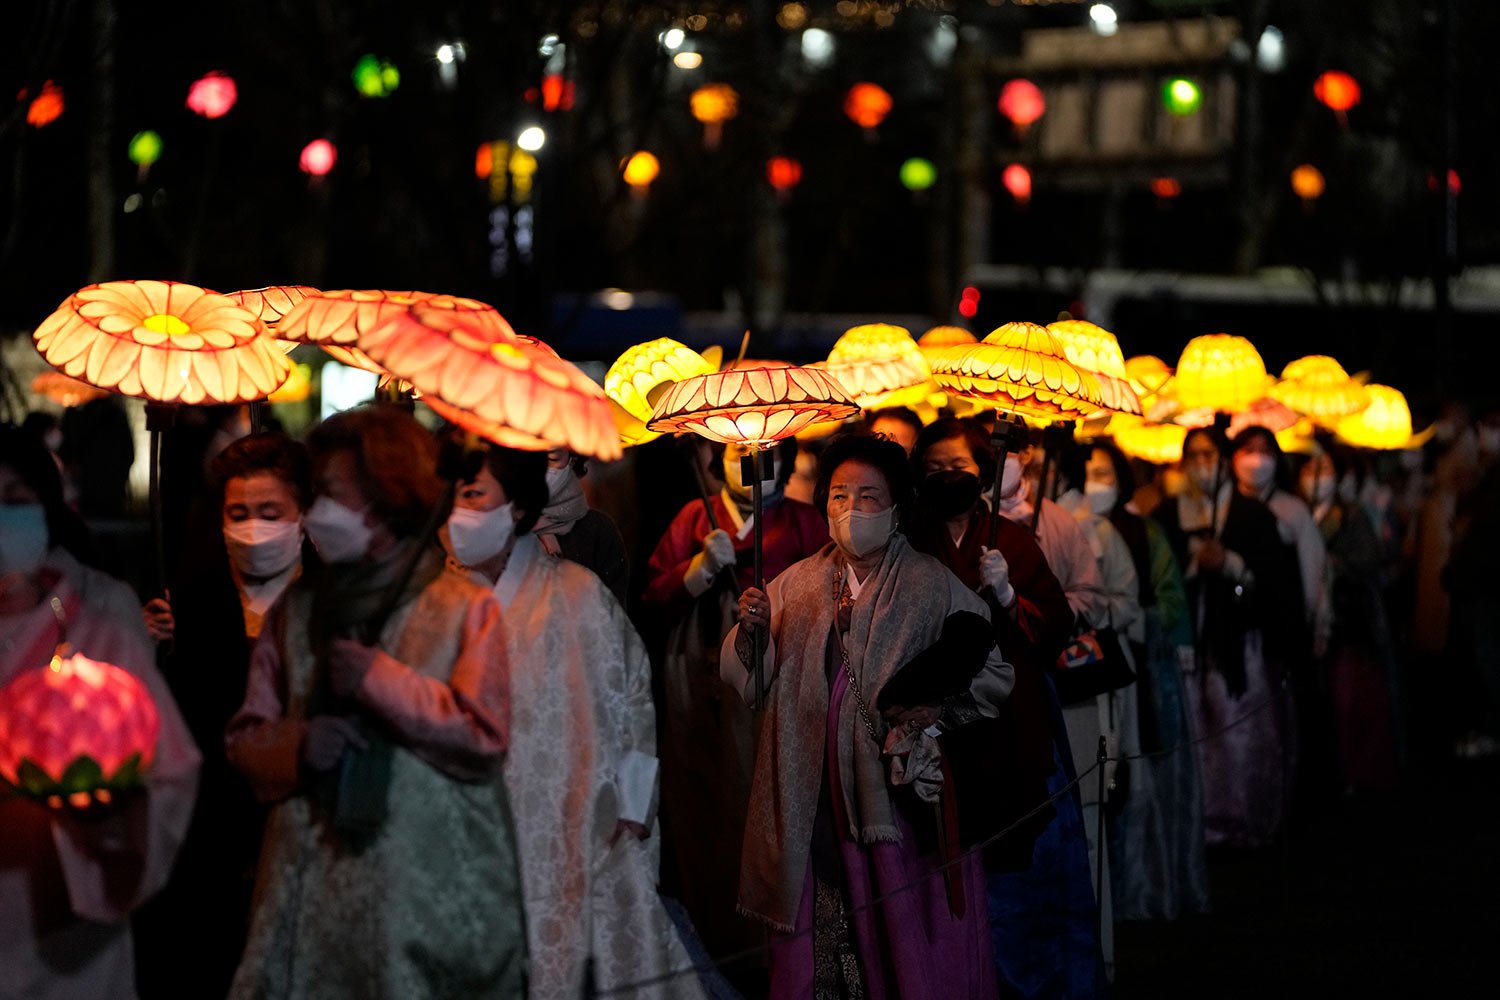  South Korean Buddhists wearing face masks, carry colorful lotus lanterns during the lighting ceremony to celebrate for the upcoming birthday of Buddha on May 8, in Seoul, South Korea, Tuesday, April 5, 2022. (AP Photo/Lee Jin-man) 